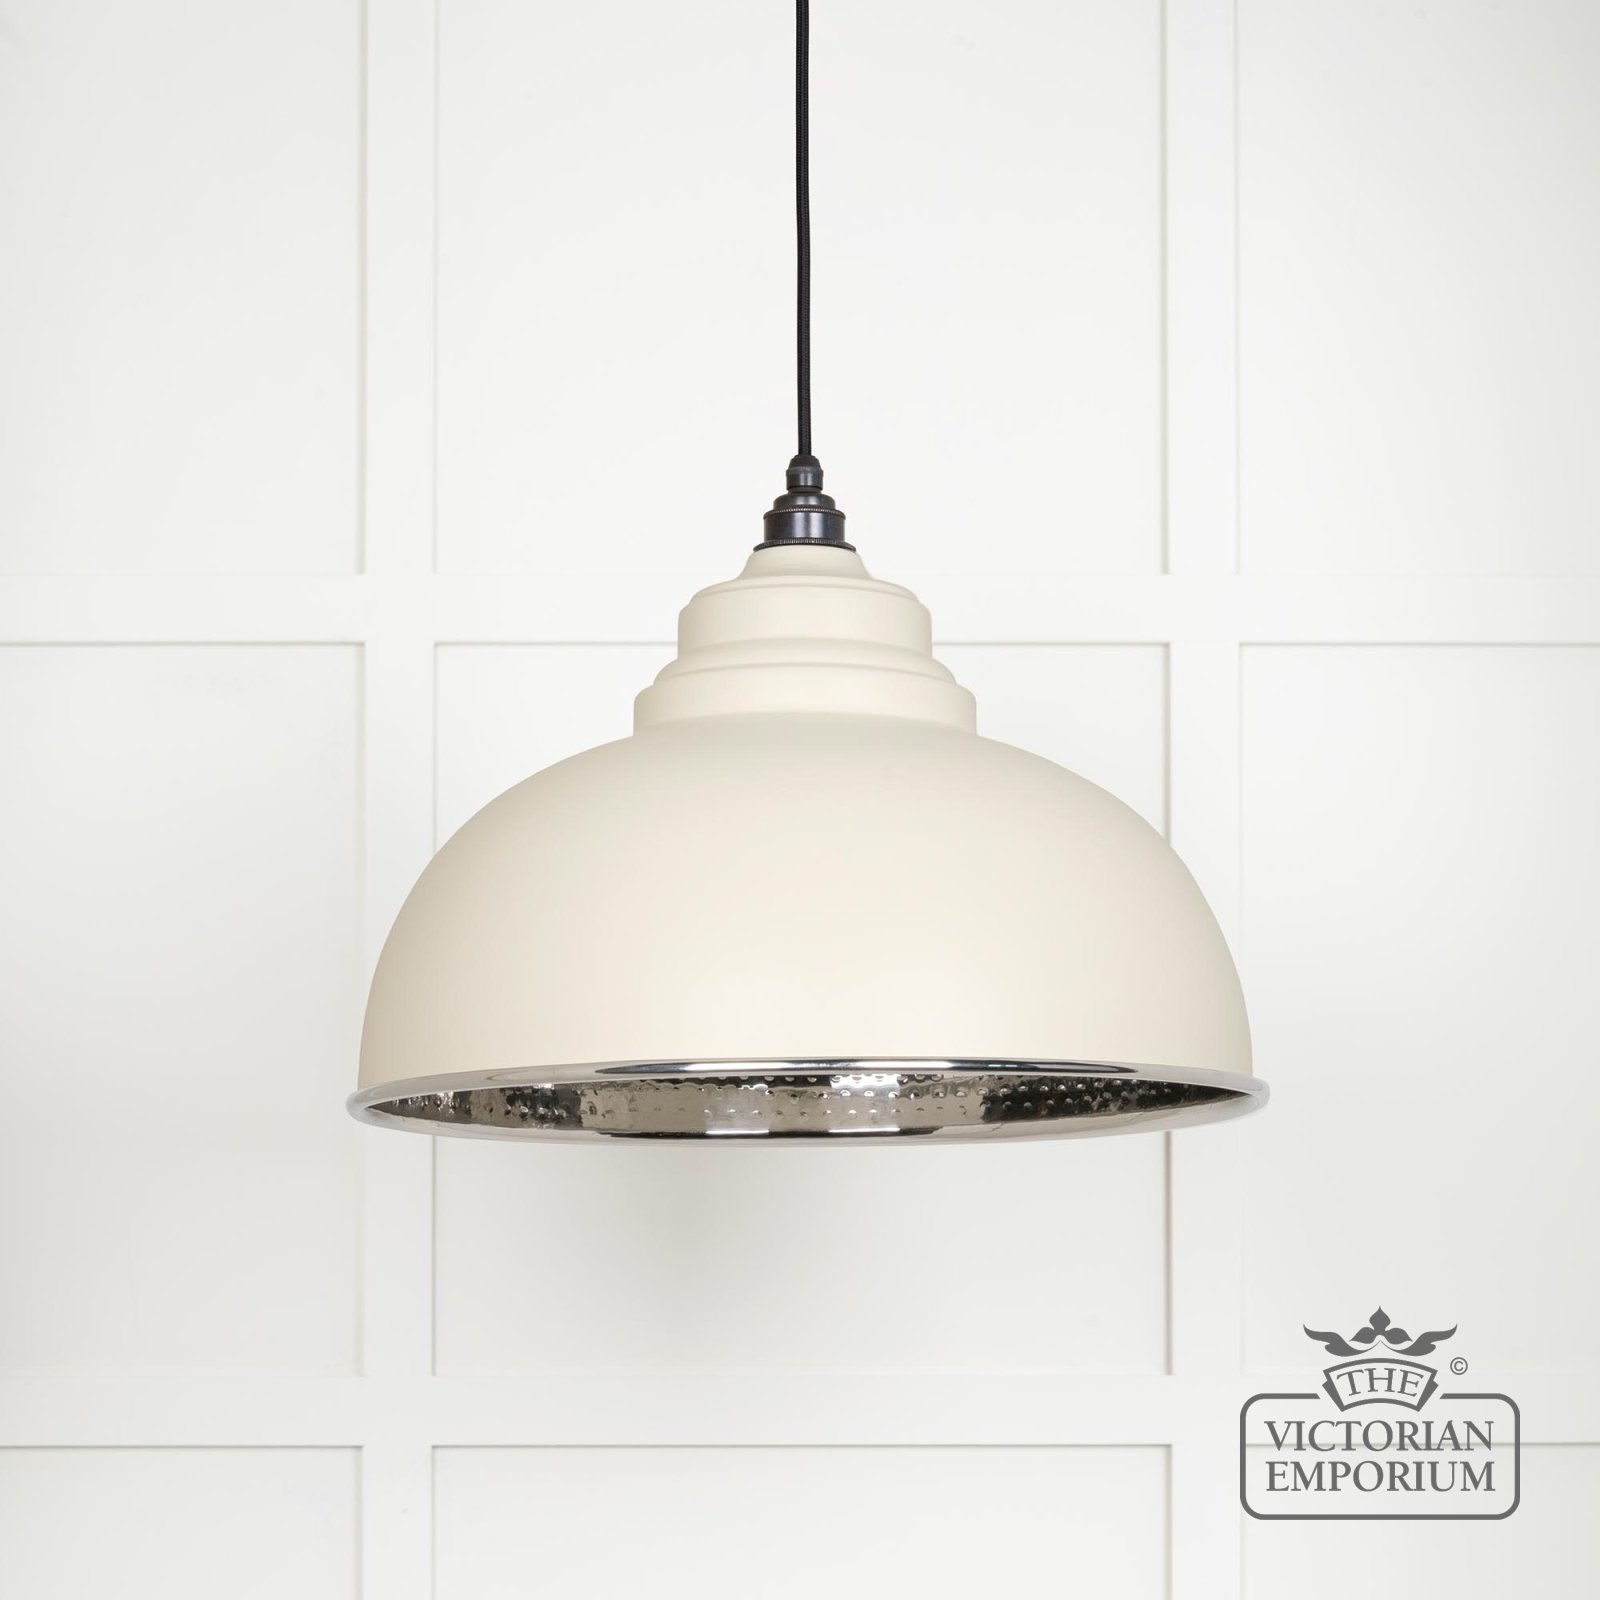 Harlow Pendant light in Hammered Nickel with Teasel Exterior